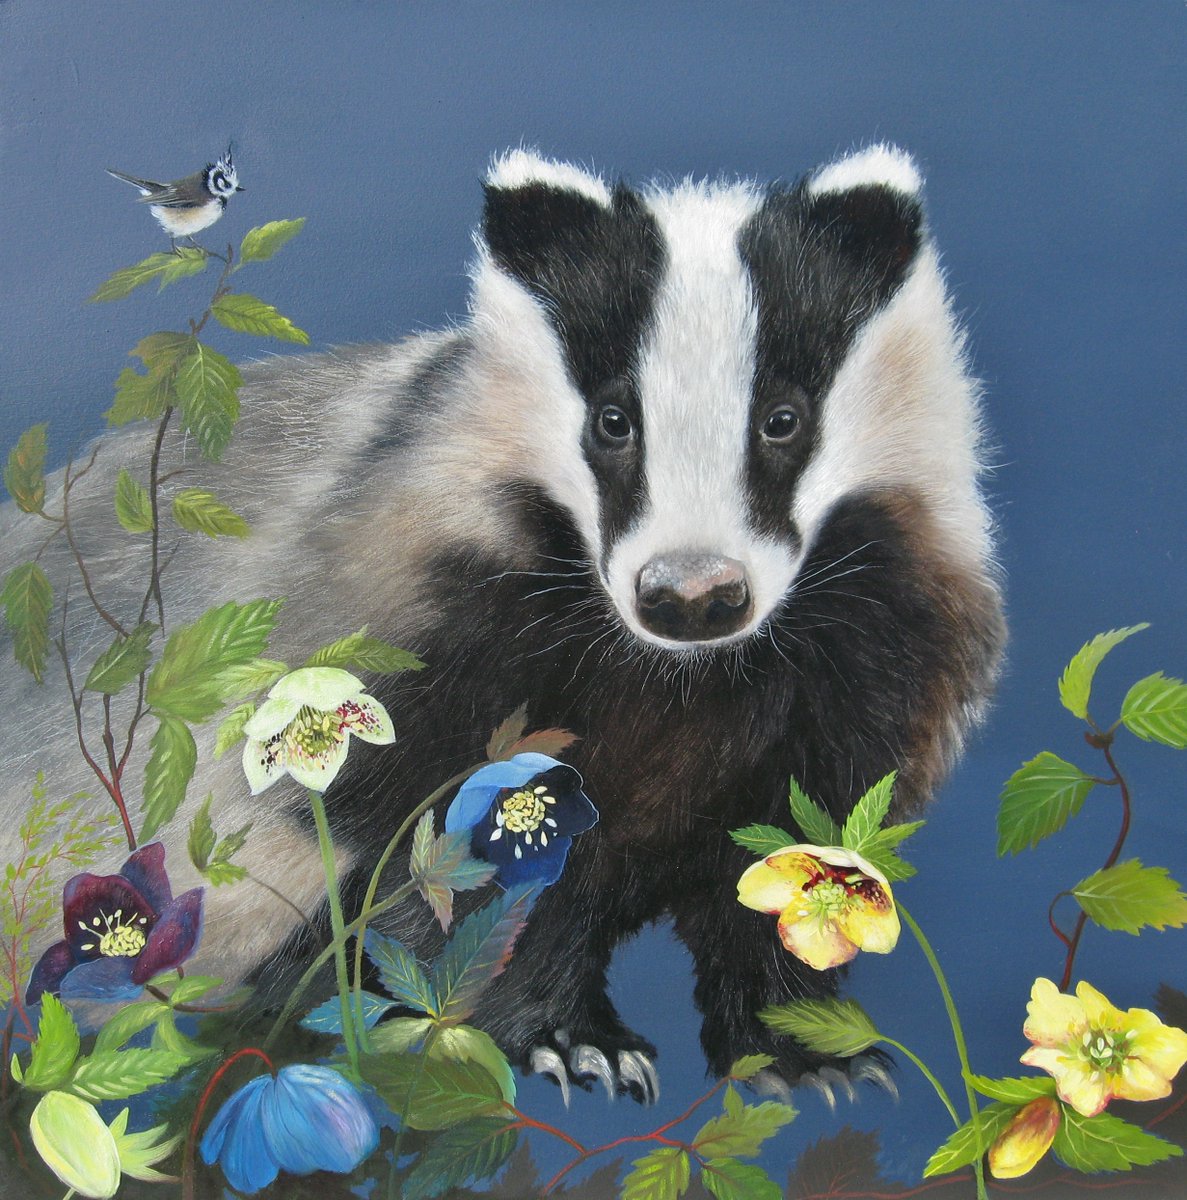 This oil painting will be part of a show at the Bonnie Badger Restaurant in Gullane 16th April, raising funds for Cancer and ME research charities. Many of Scotland's top tier artists are taking part,  and it'll be great!  #bonniebadger